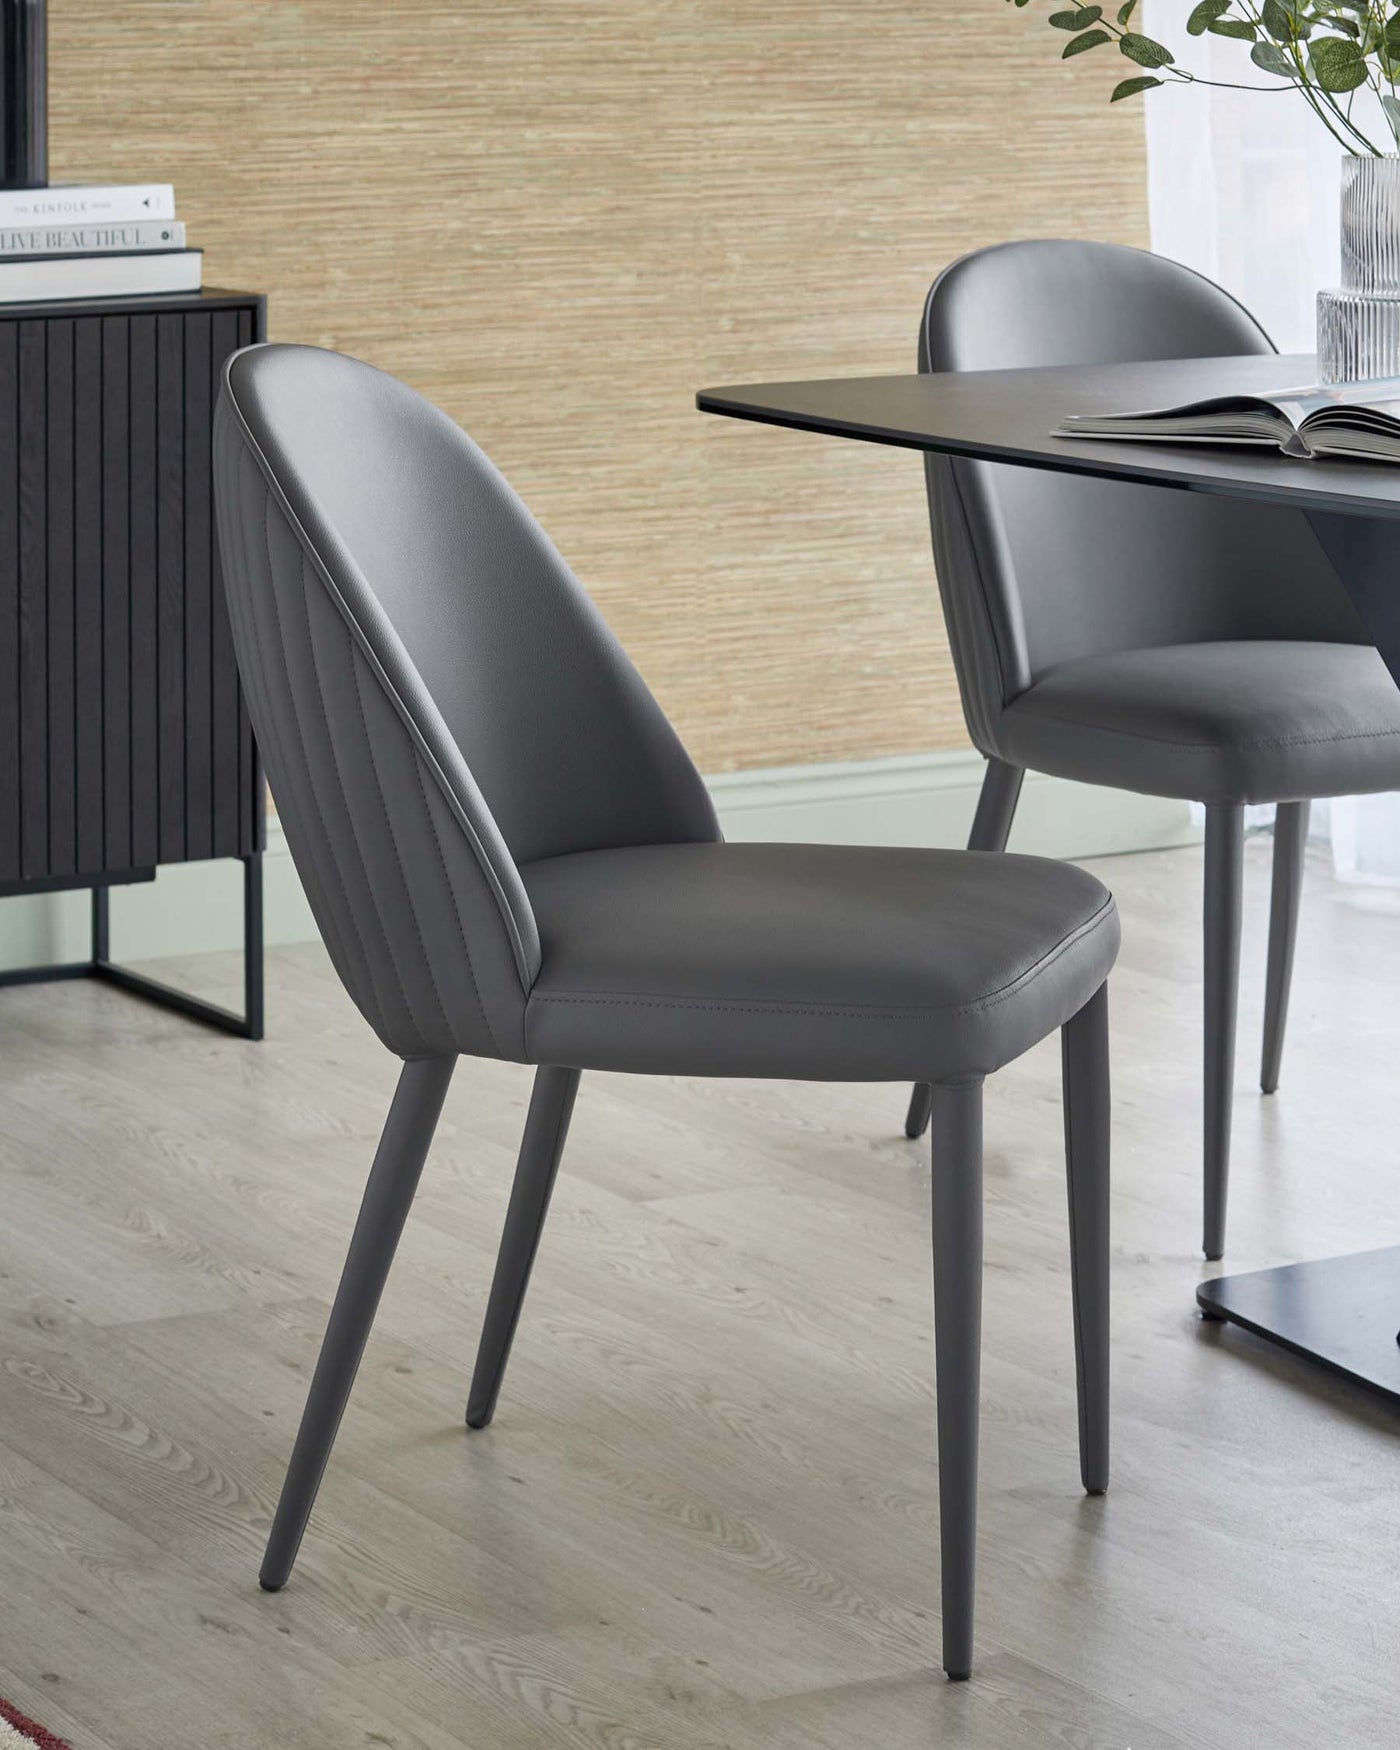 Saylor dark grey faux leather dining chair